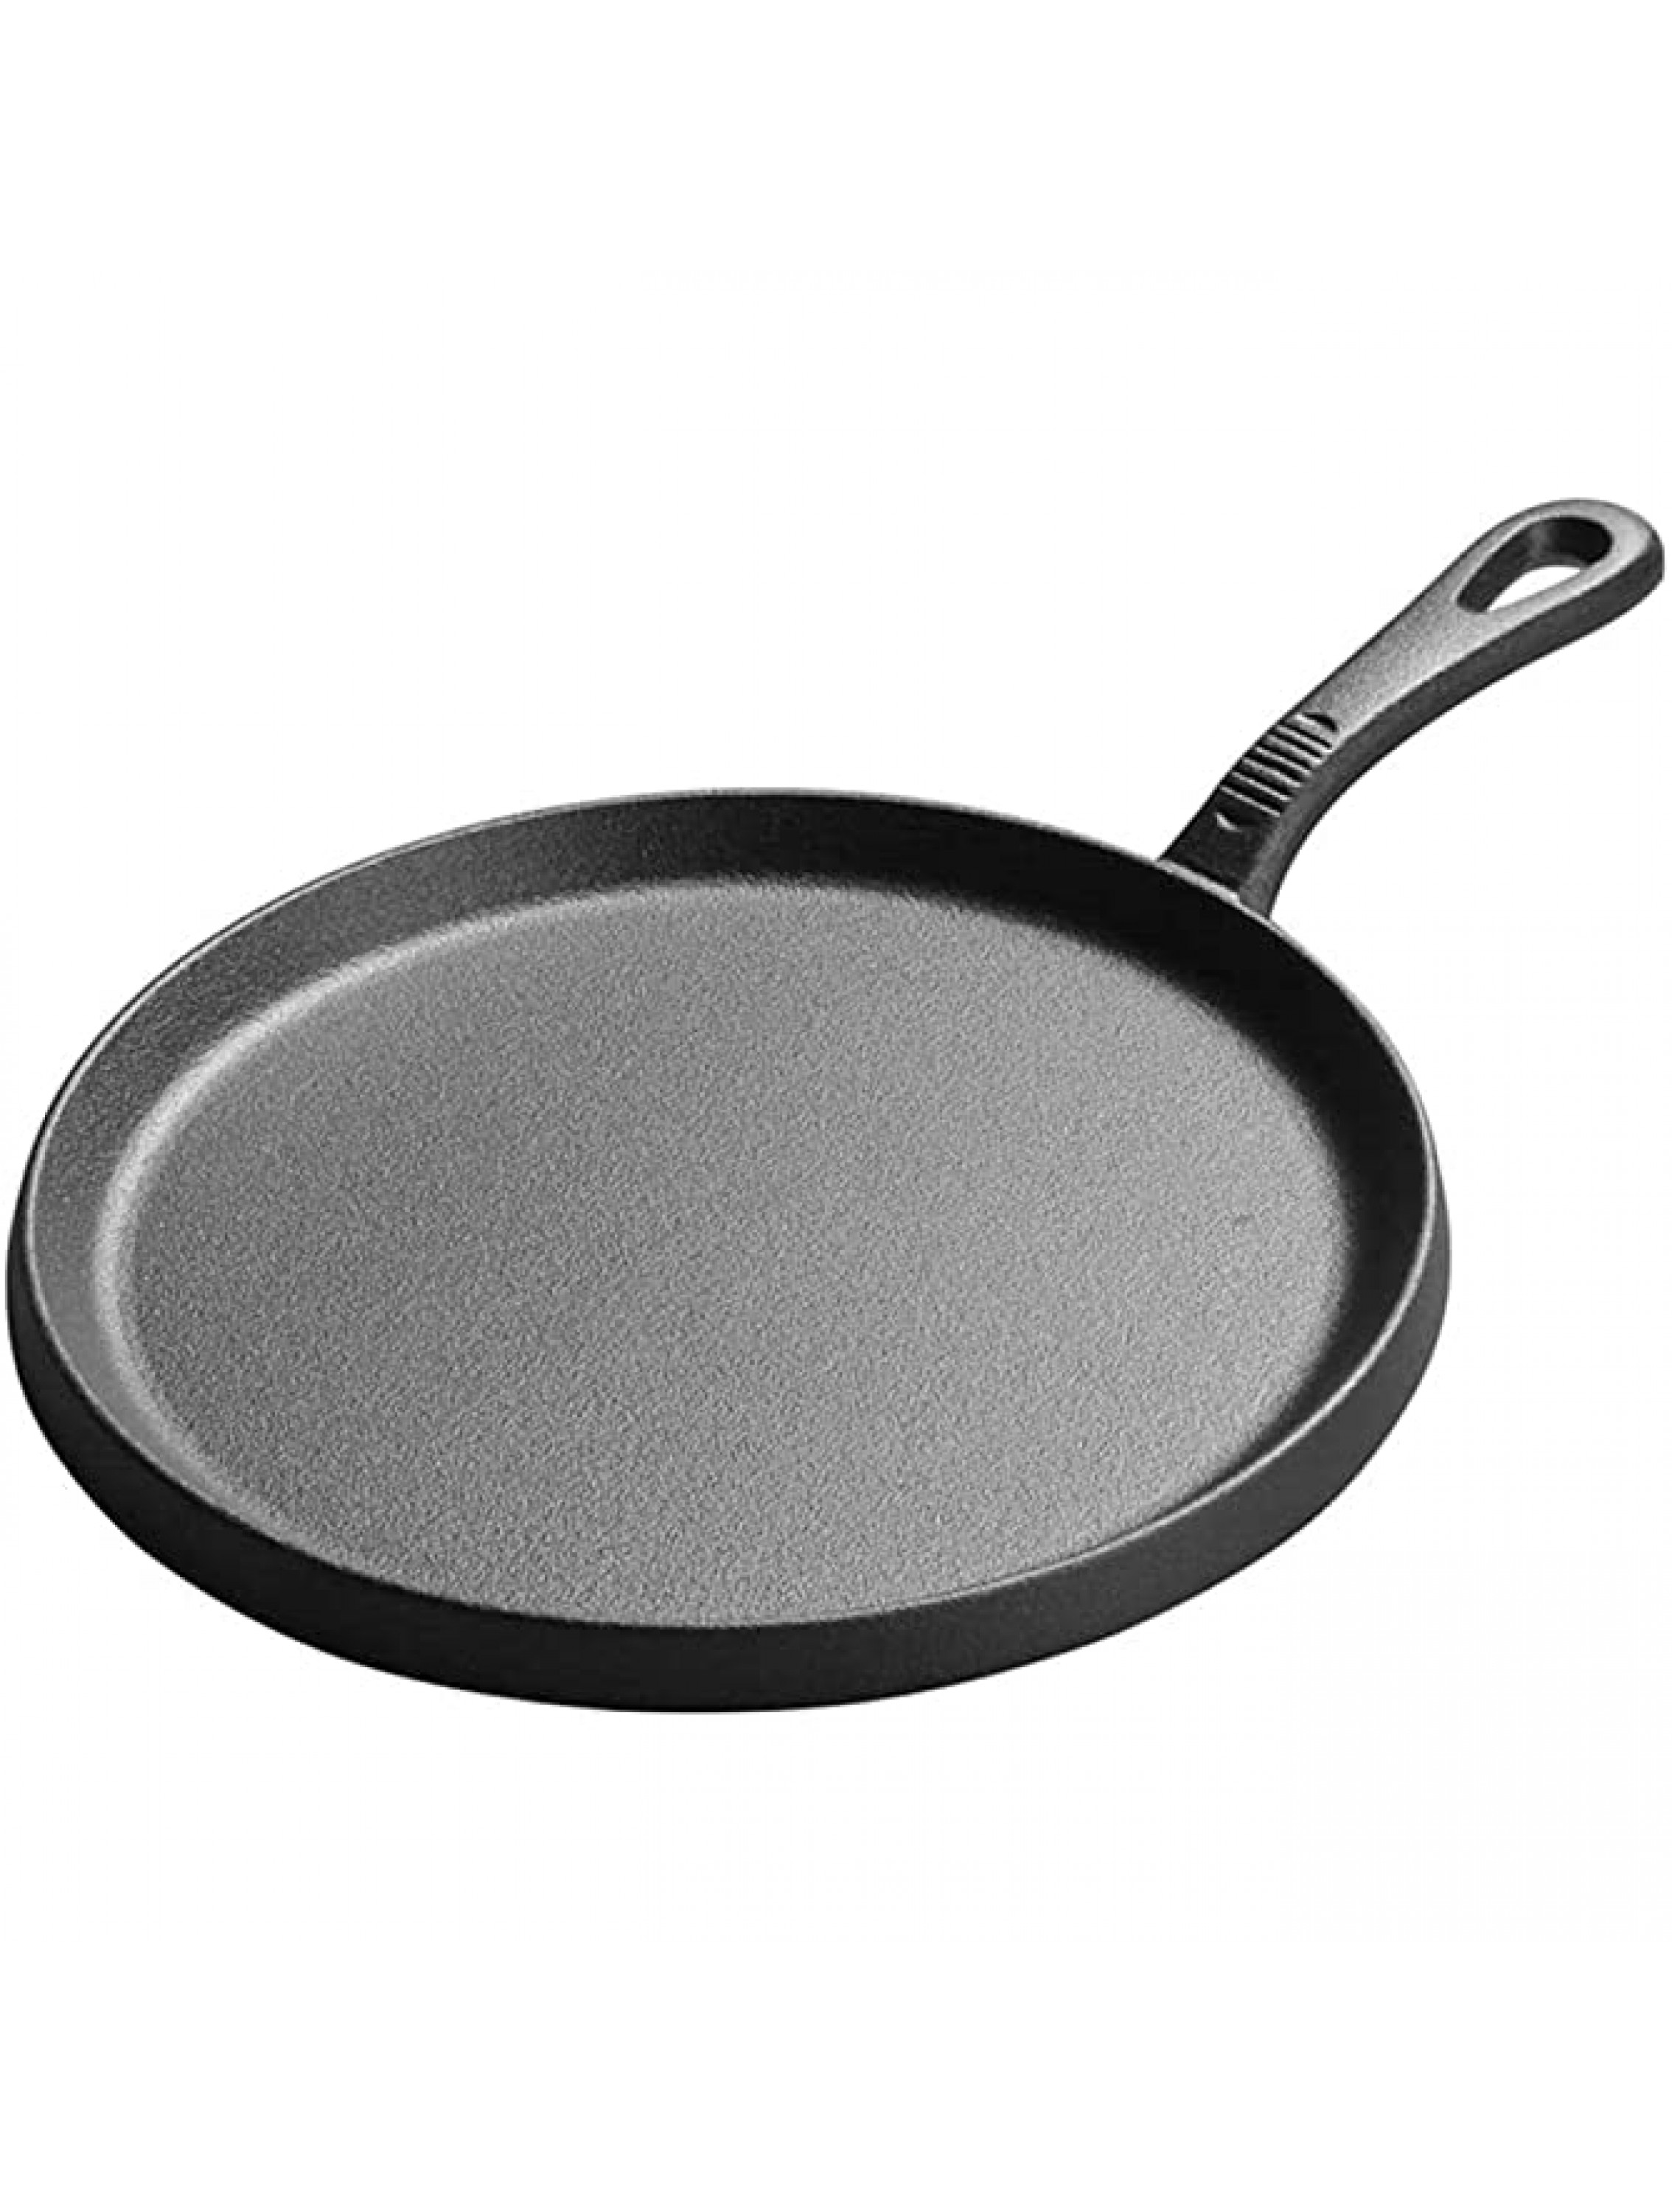 LMZZ Thickened Cast Iron Griddles Crepe Pan Omelet Pancake Griddles Home Non Stick 25Cm - B8EOOYV70